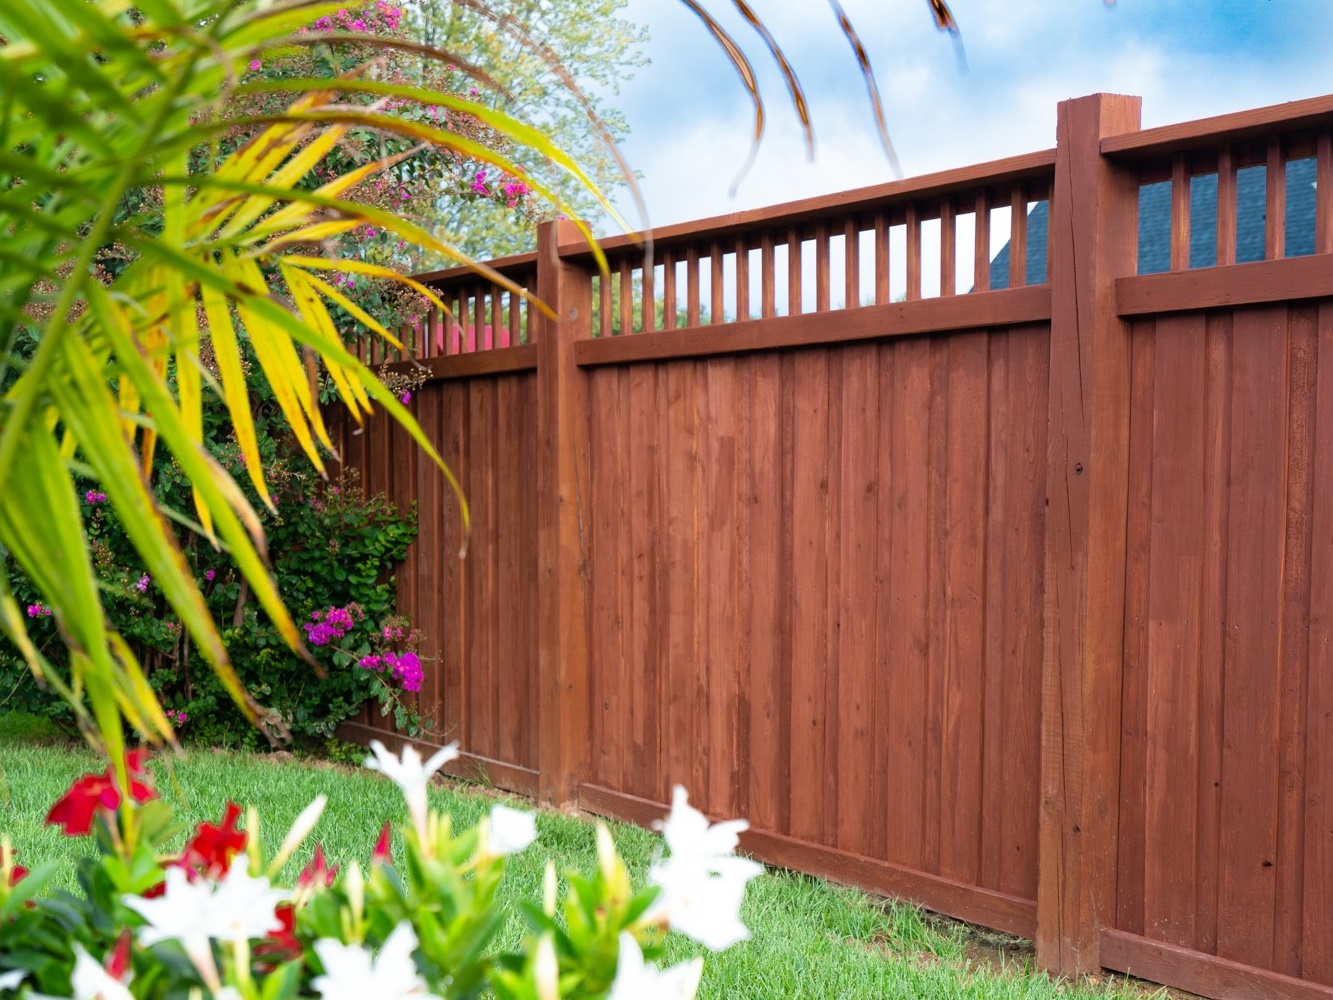 Cloverport KY Spindle Top style wood fence